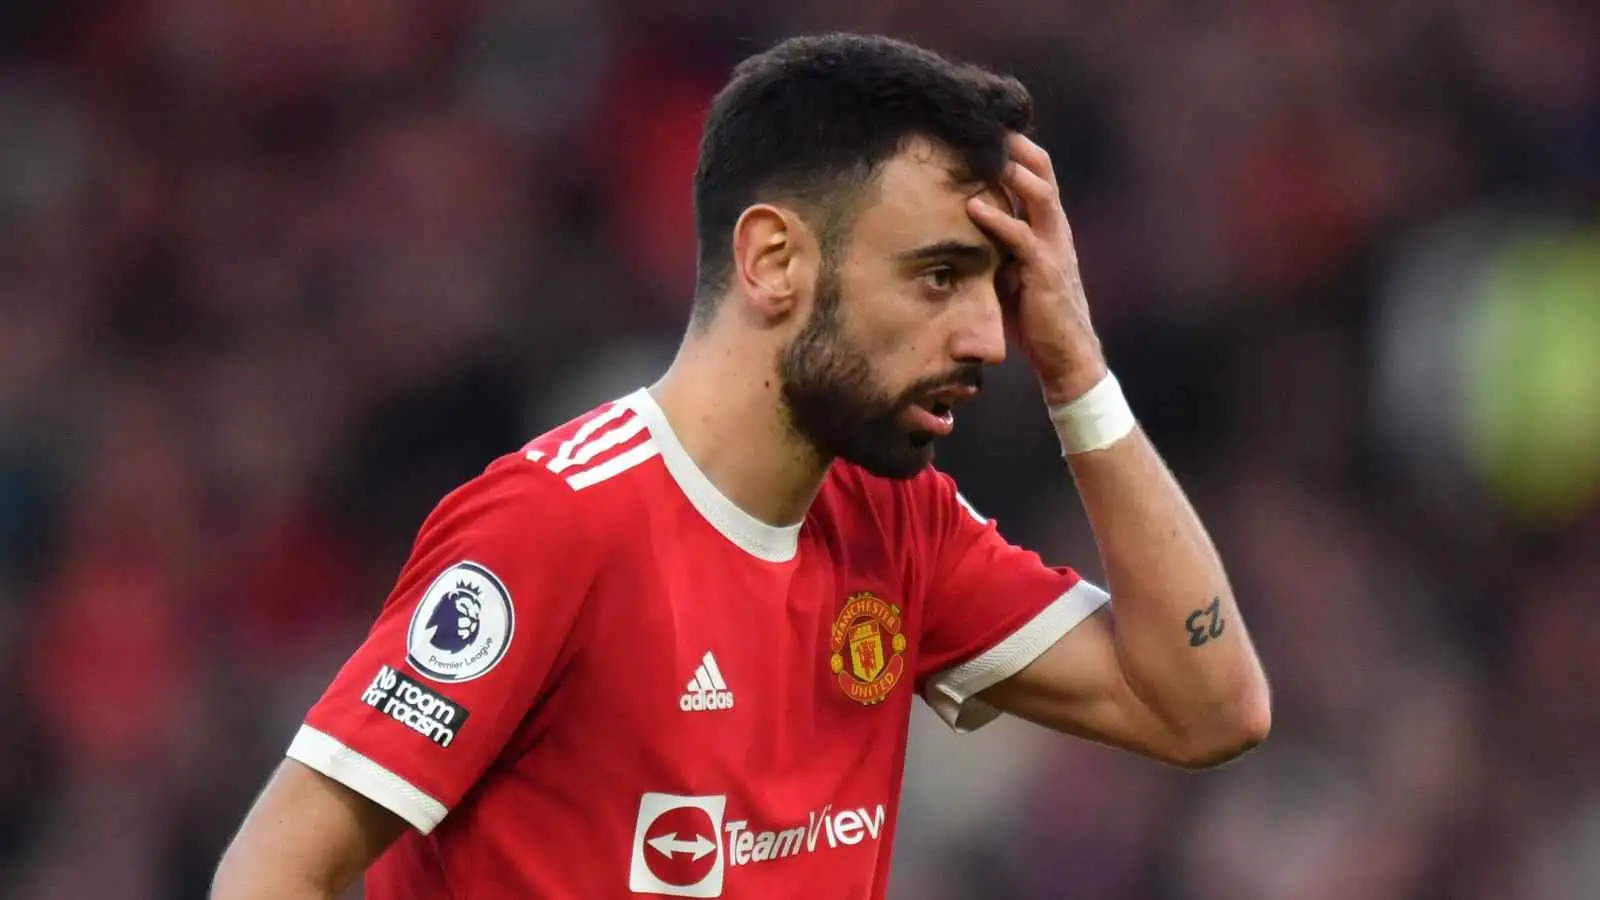 Bruno Fernandes reacting during a Manchester United match